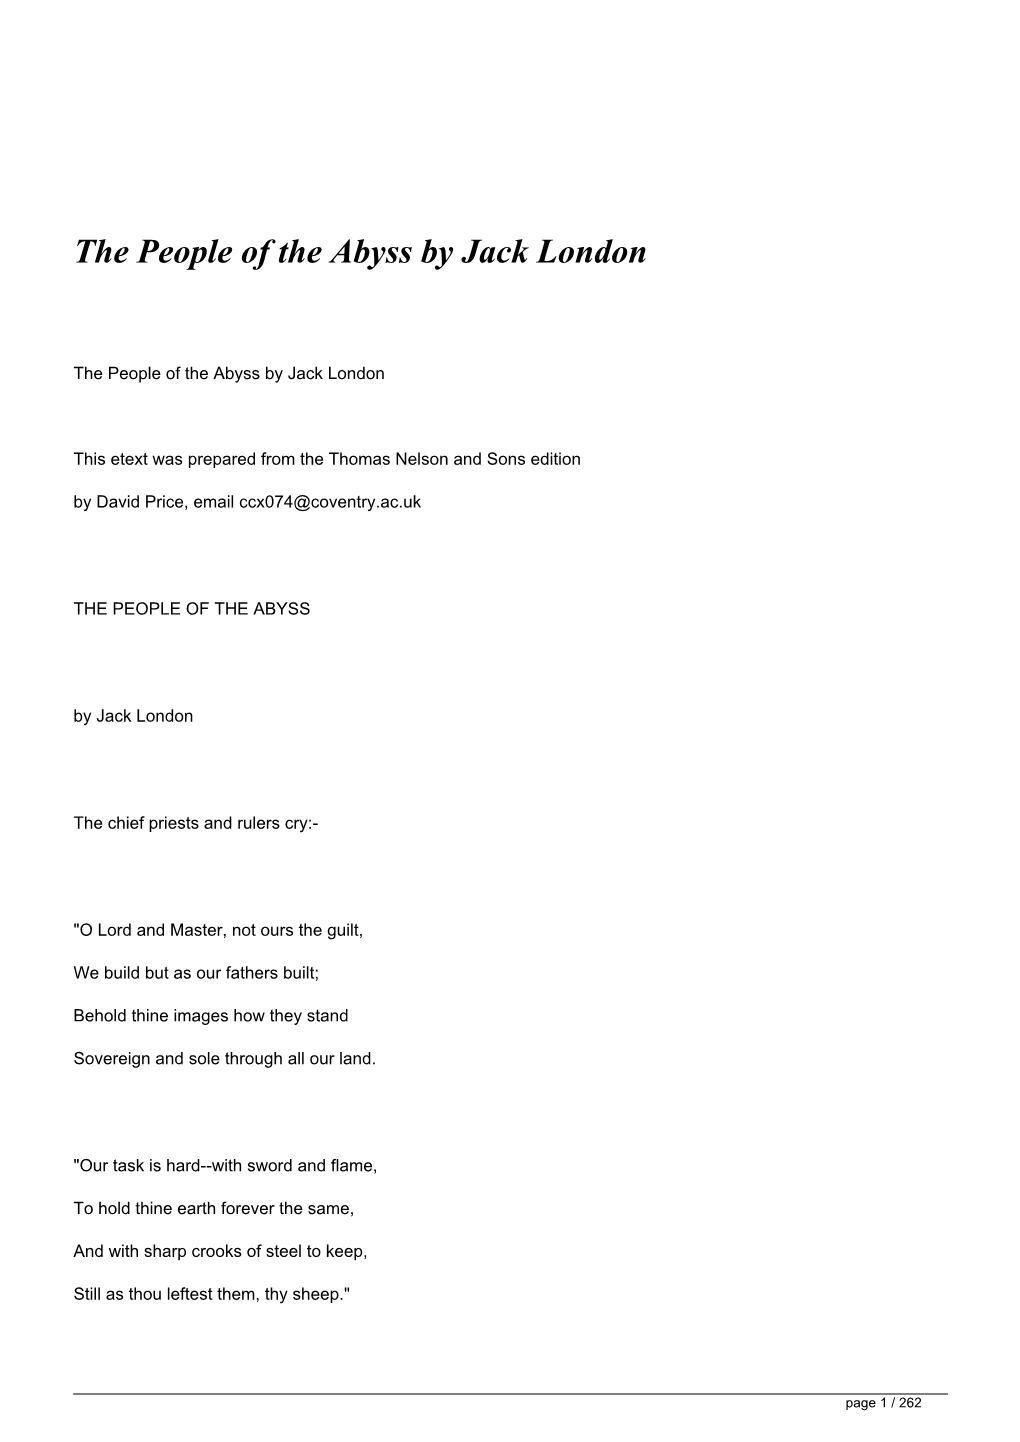 The People of the Abyss by Jack London&lt;/H1&gt;